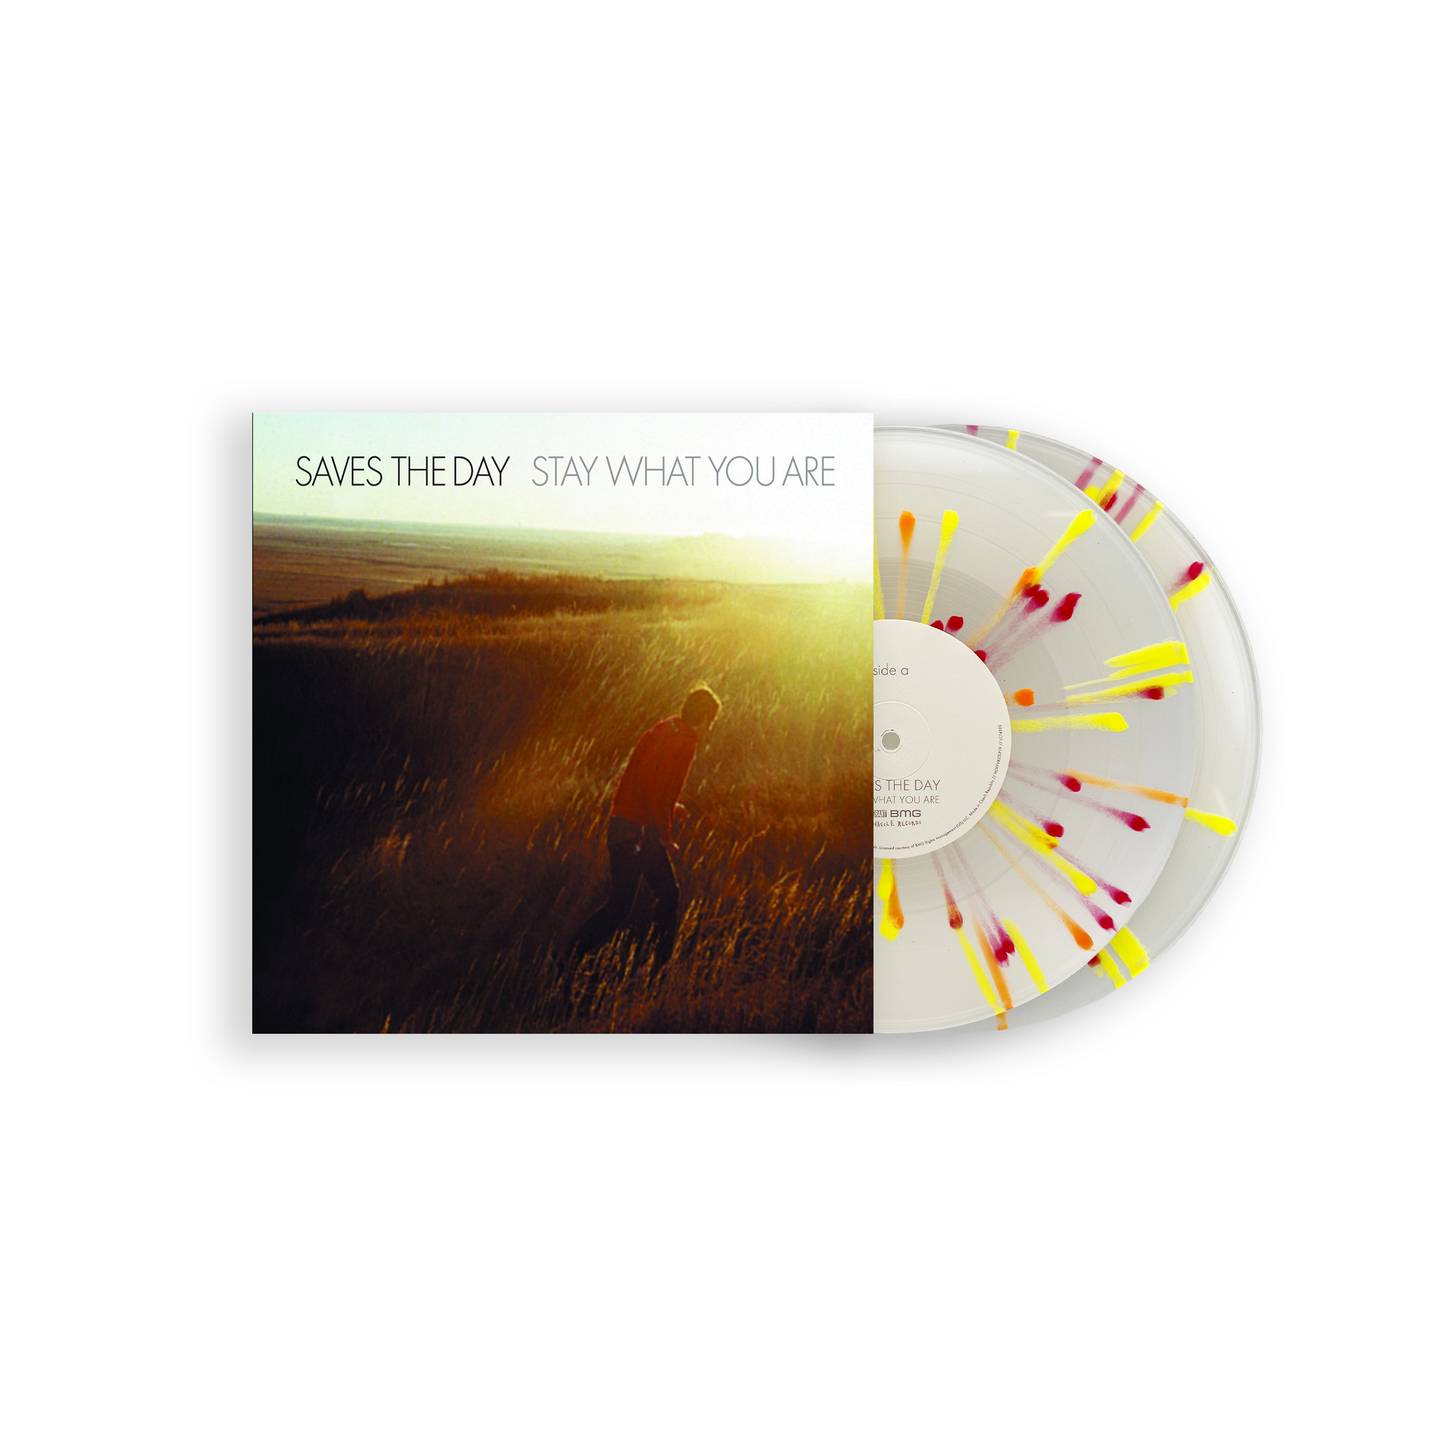 Saves The Day 'Stay What You Are'